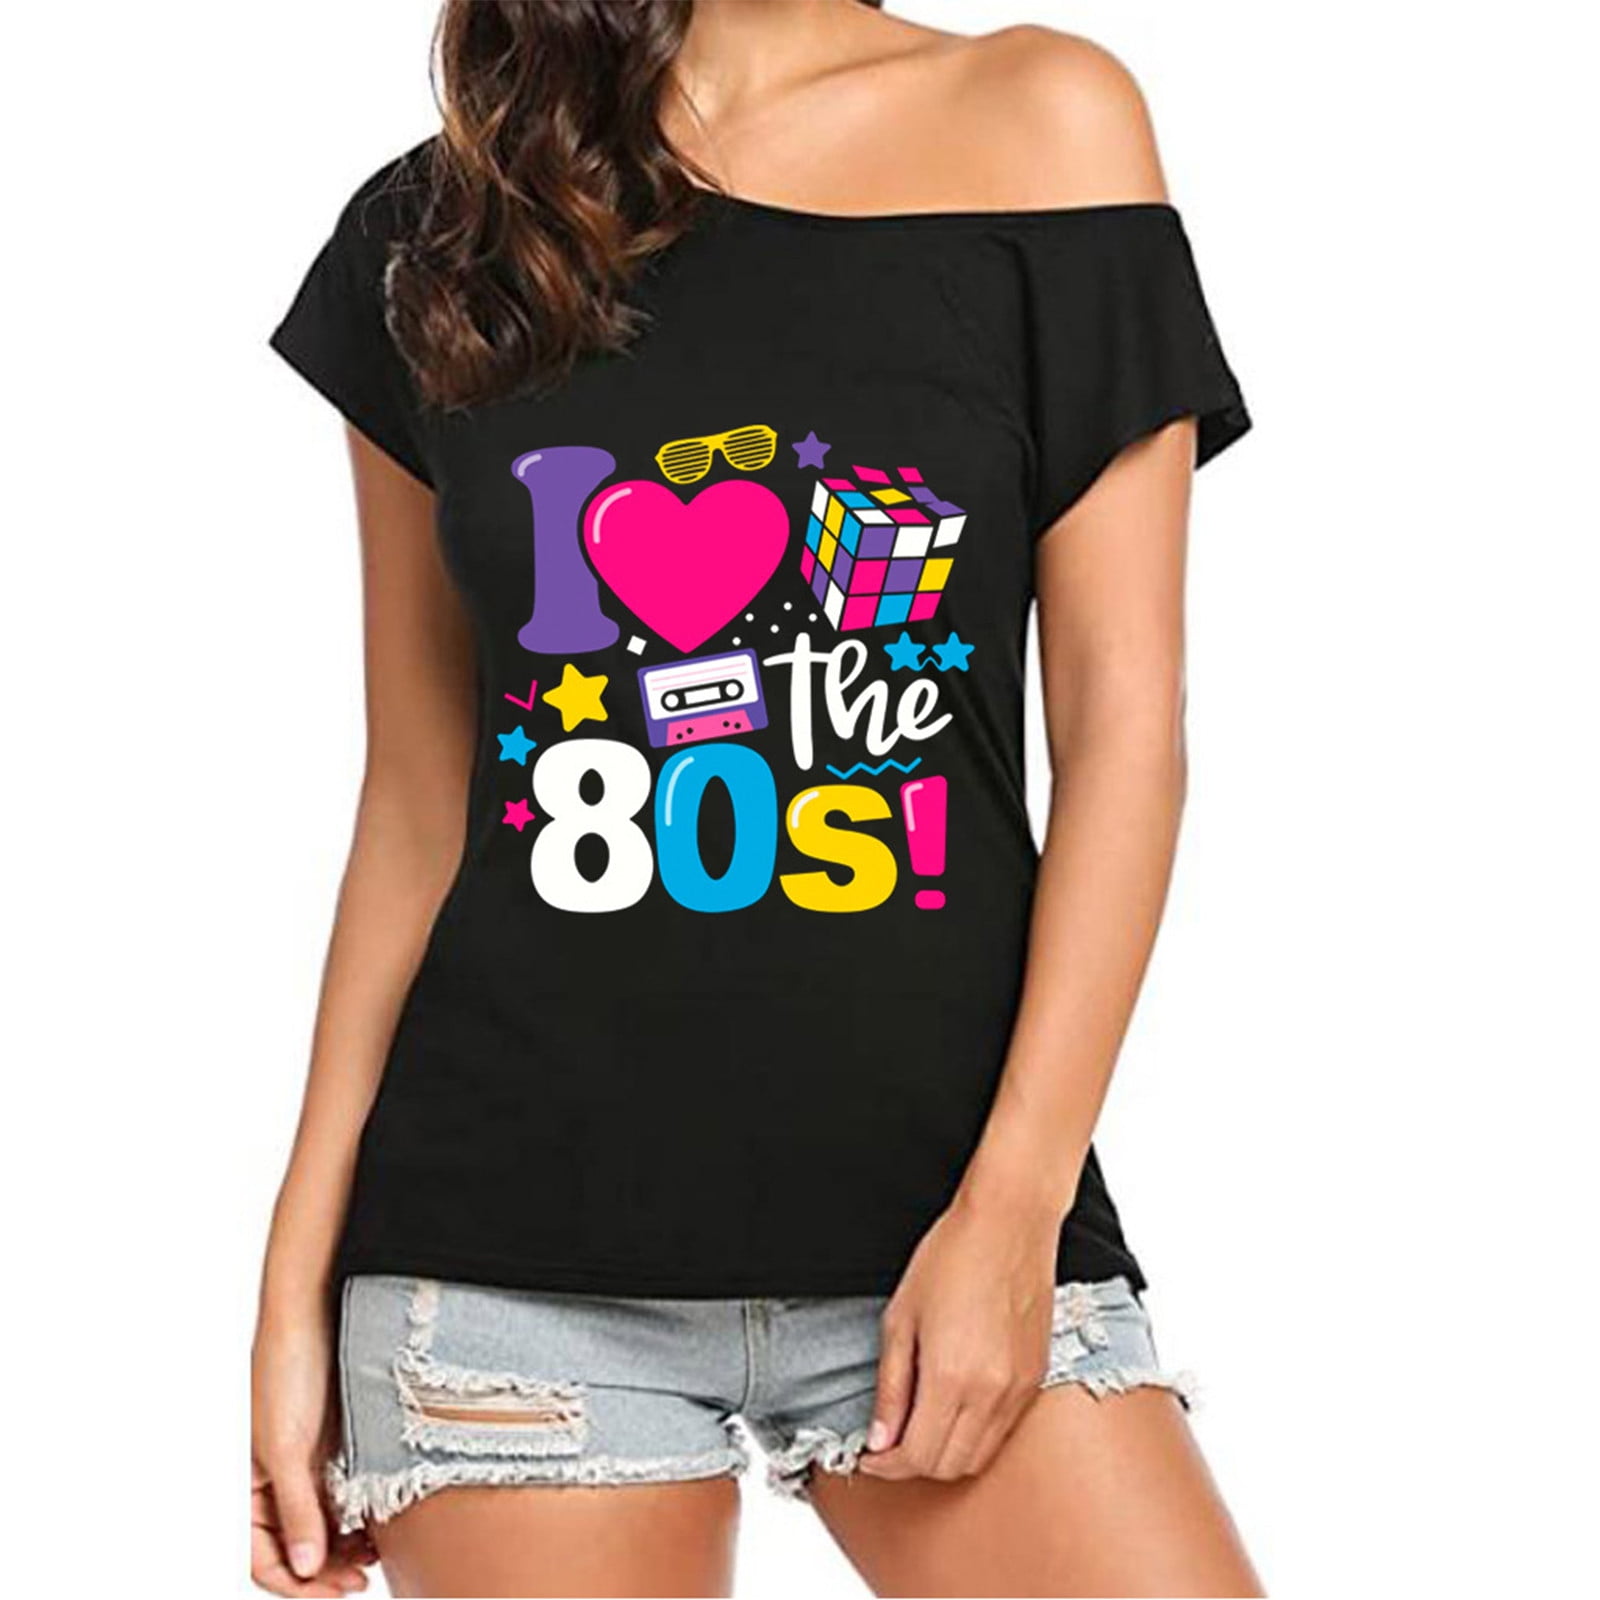  Unittype Women's I Love the 80's off the Shoulder Tops 80s  Outfit Sweatshirt 80 Styles Clothing for Women Party Outfits Black Tunics 80s  Costumes T Shirts : Clothing, Shoes & Jewelry